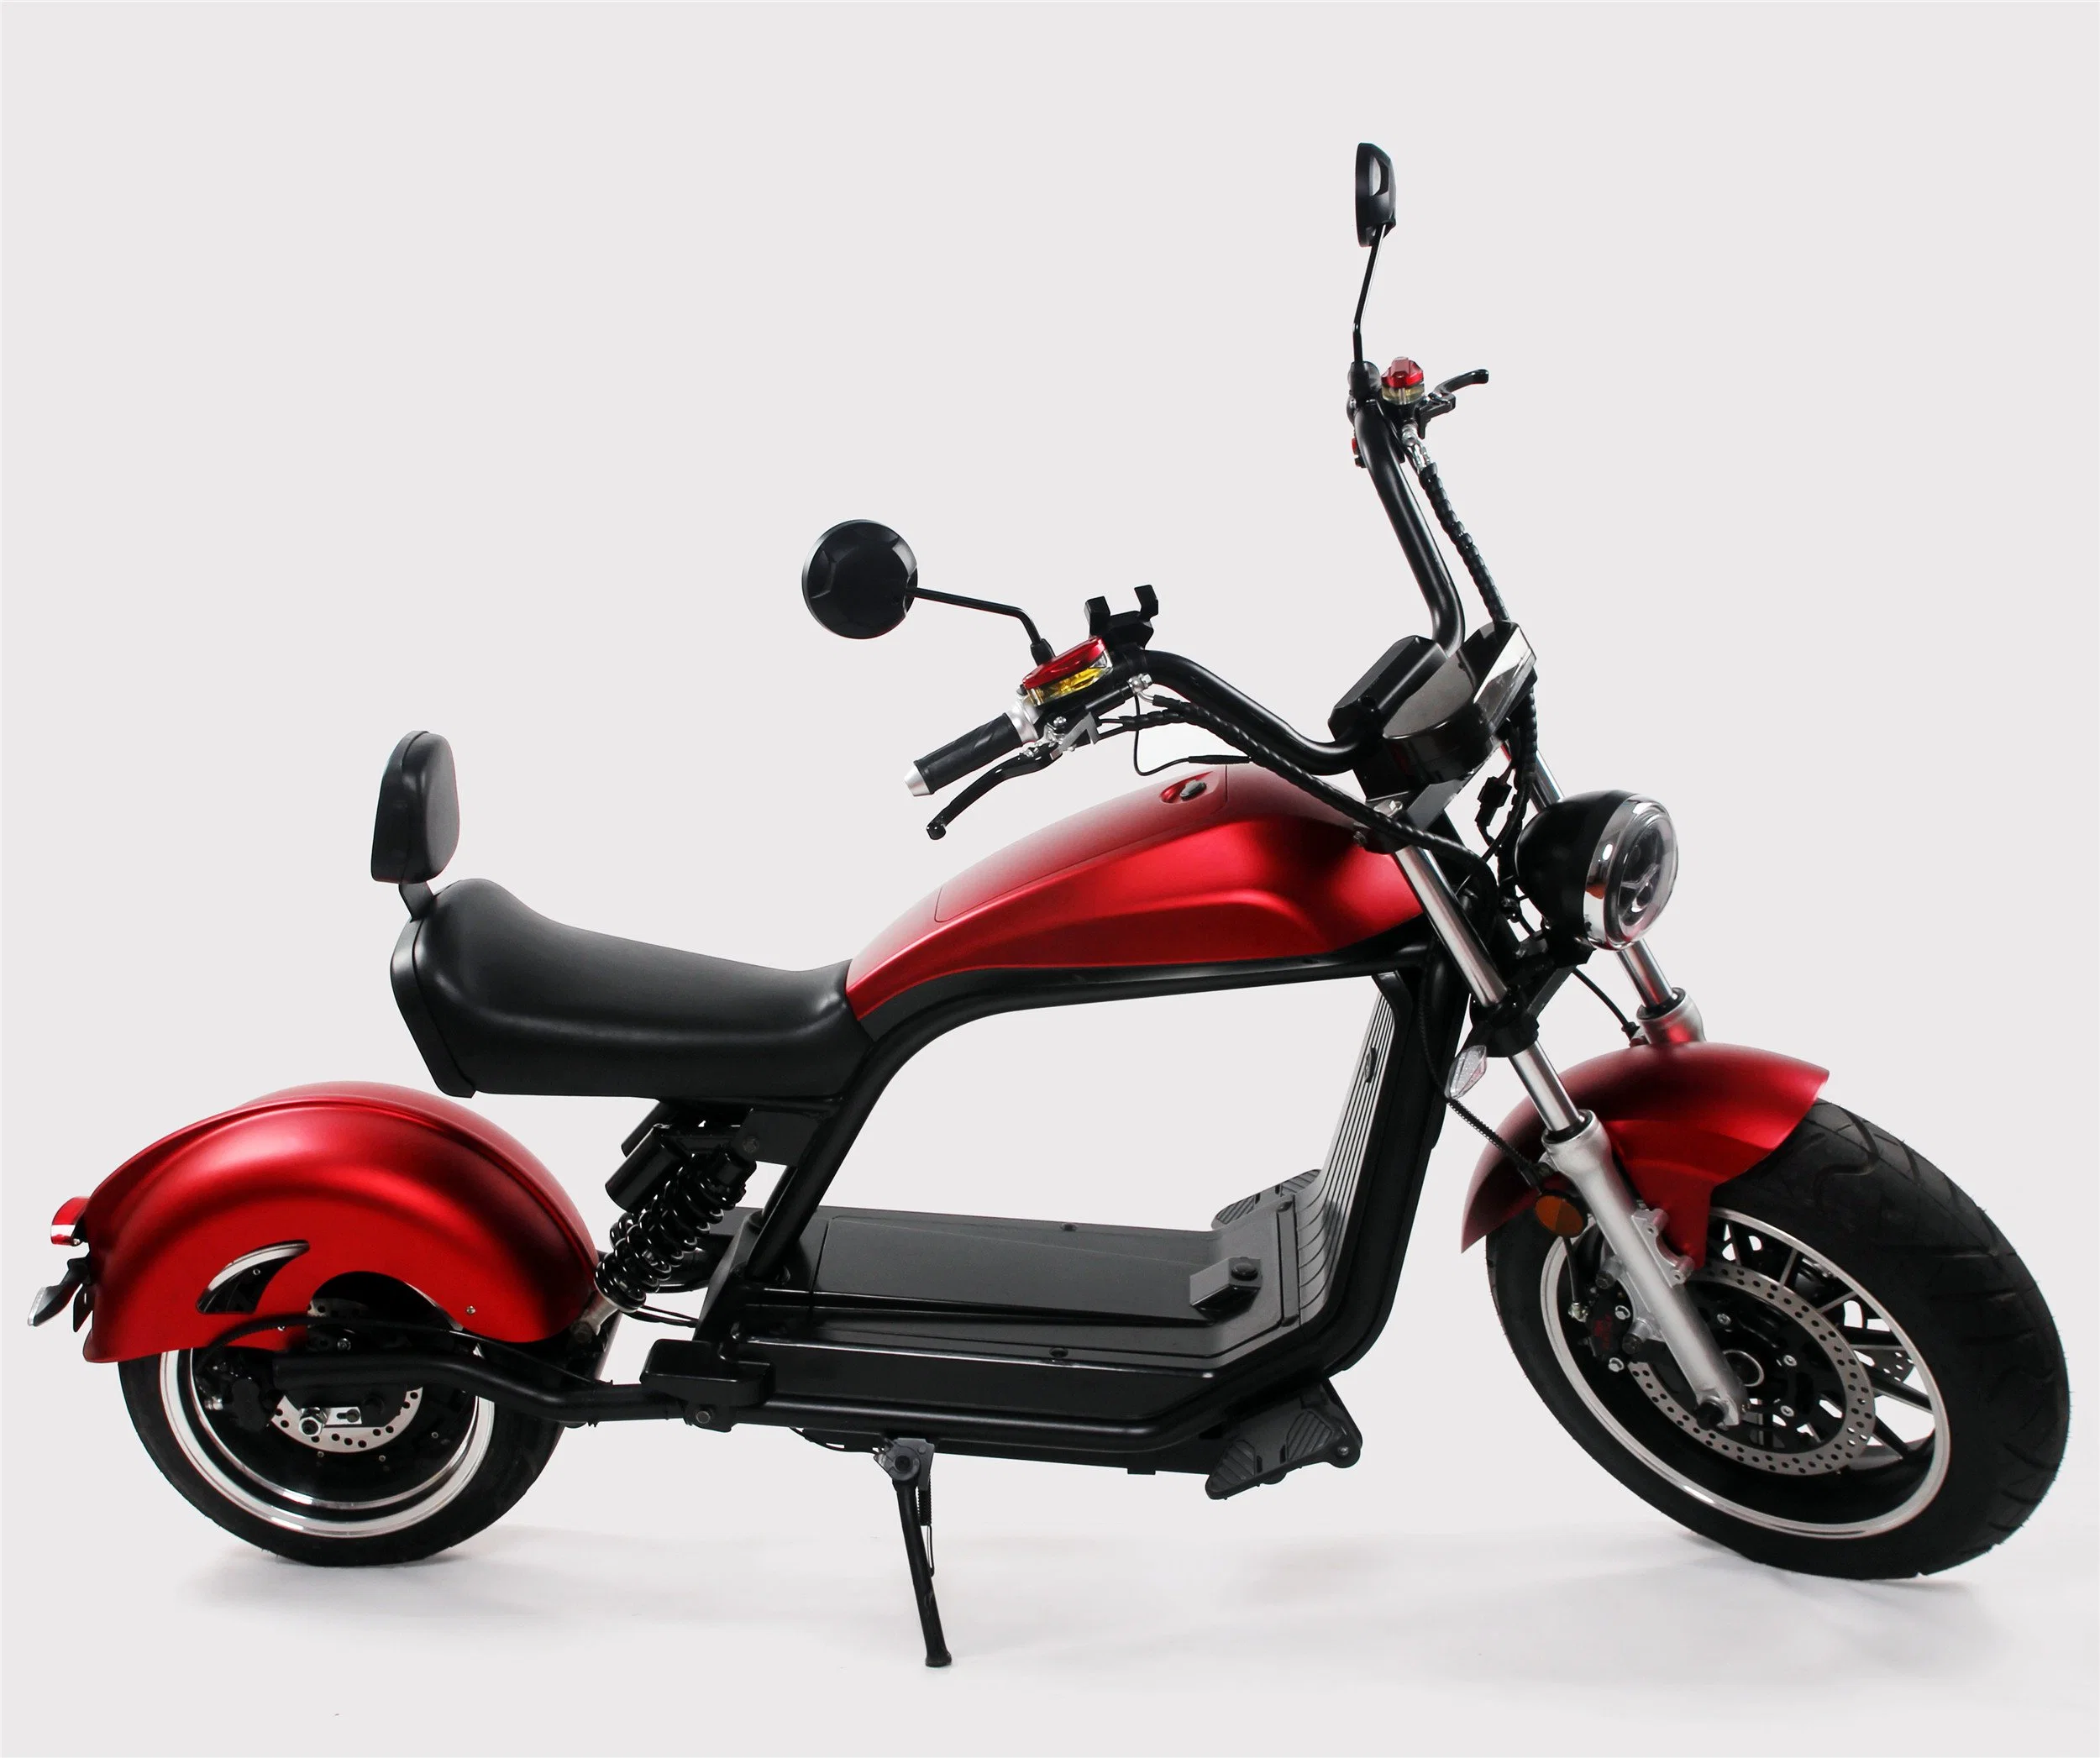 2020 New-Arrival Leather Cushions Best Performance 2 Wheel E Roller E-Scooter with Bluetooth